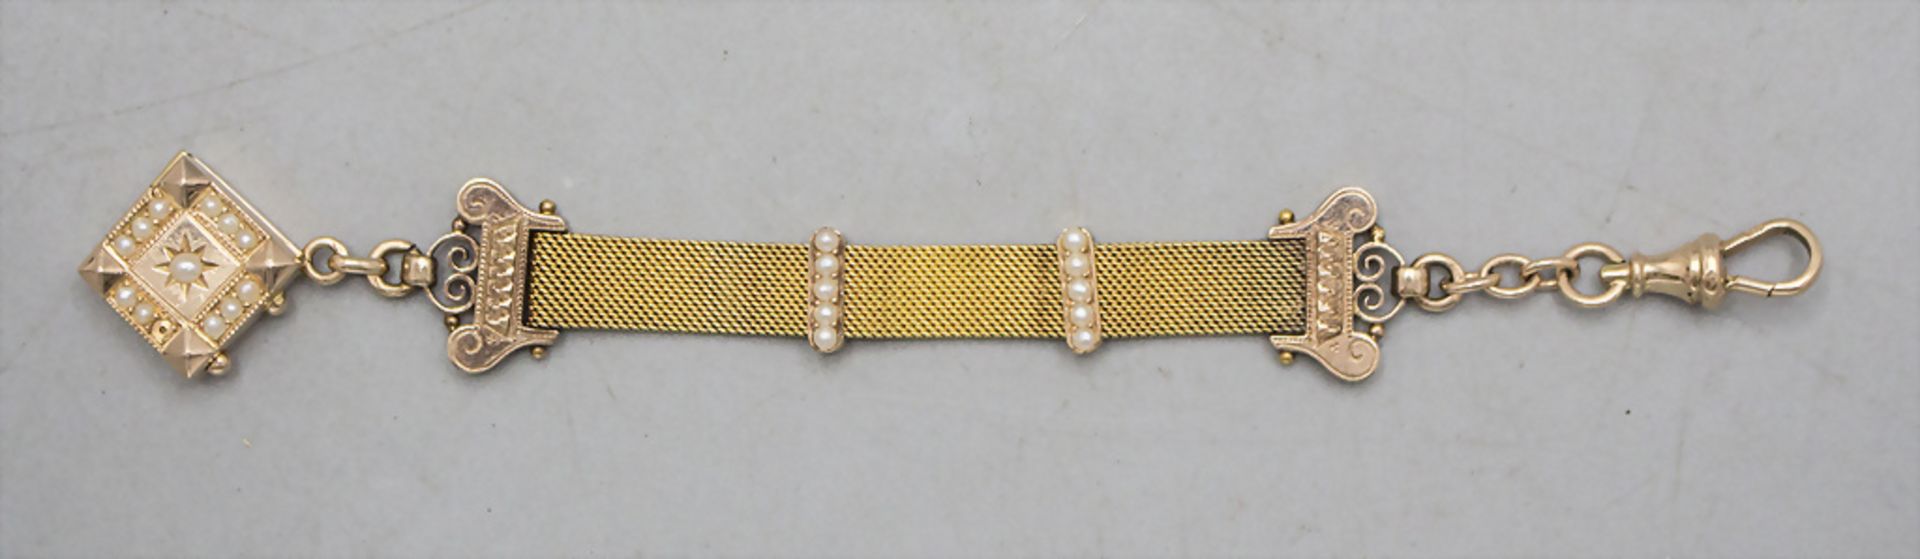 Chatelaine / Uhrenkette in Gold / A 14 ct gold watch chain, 19. Jh.